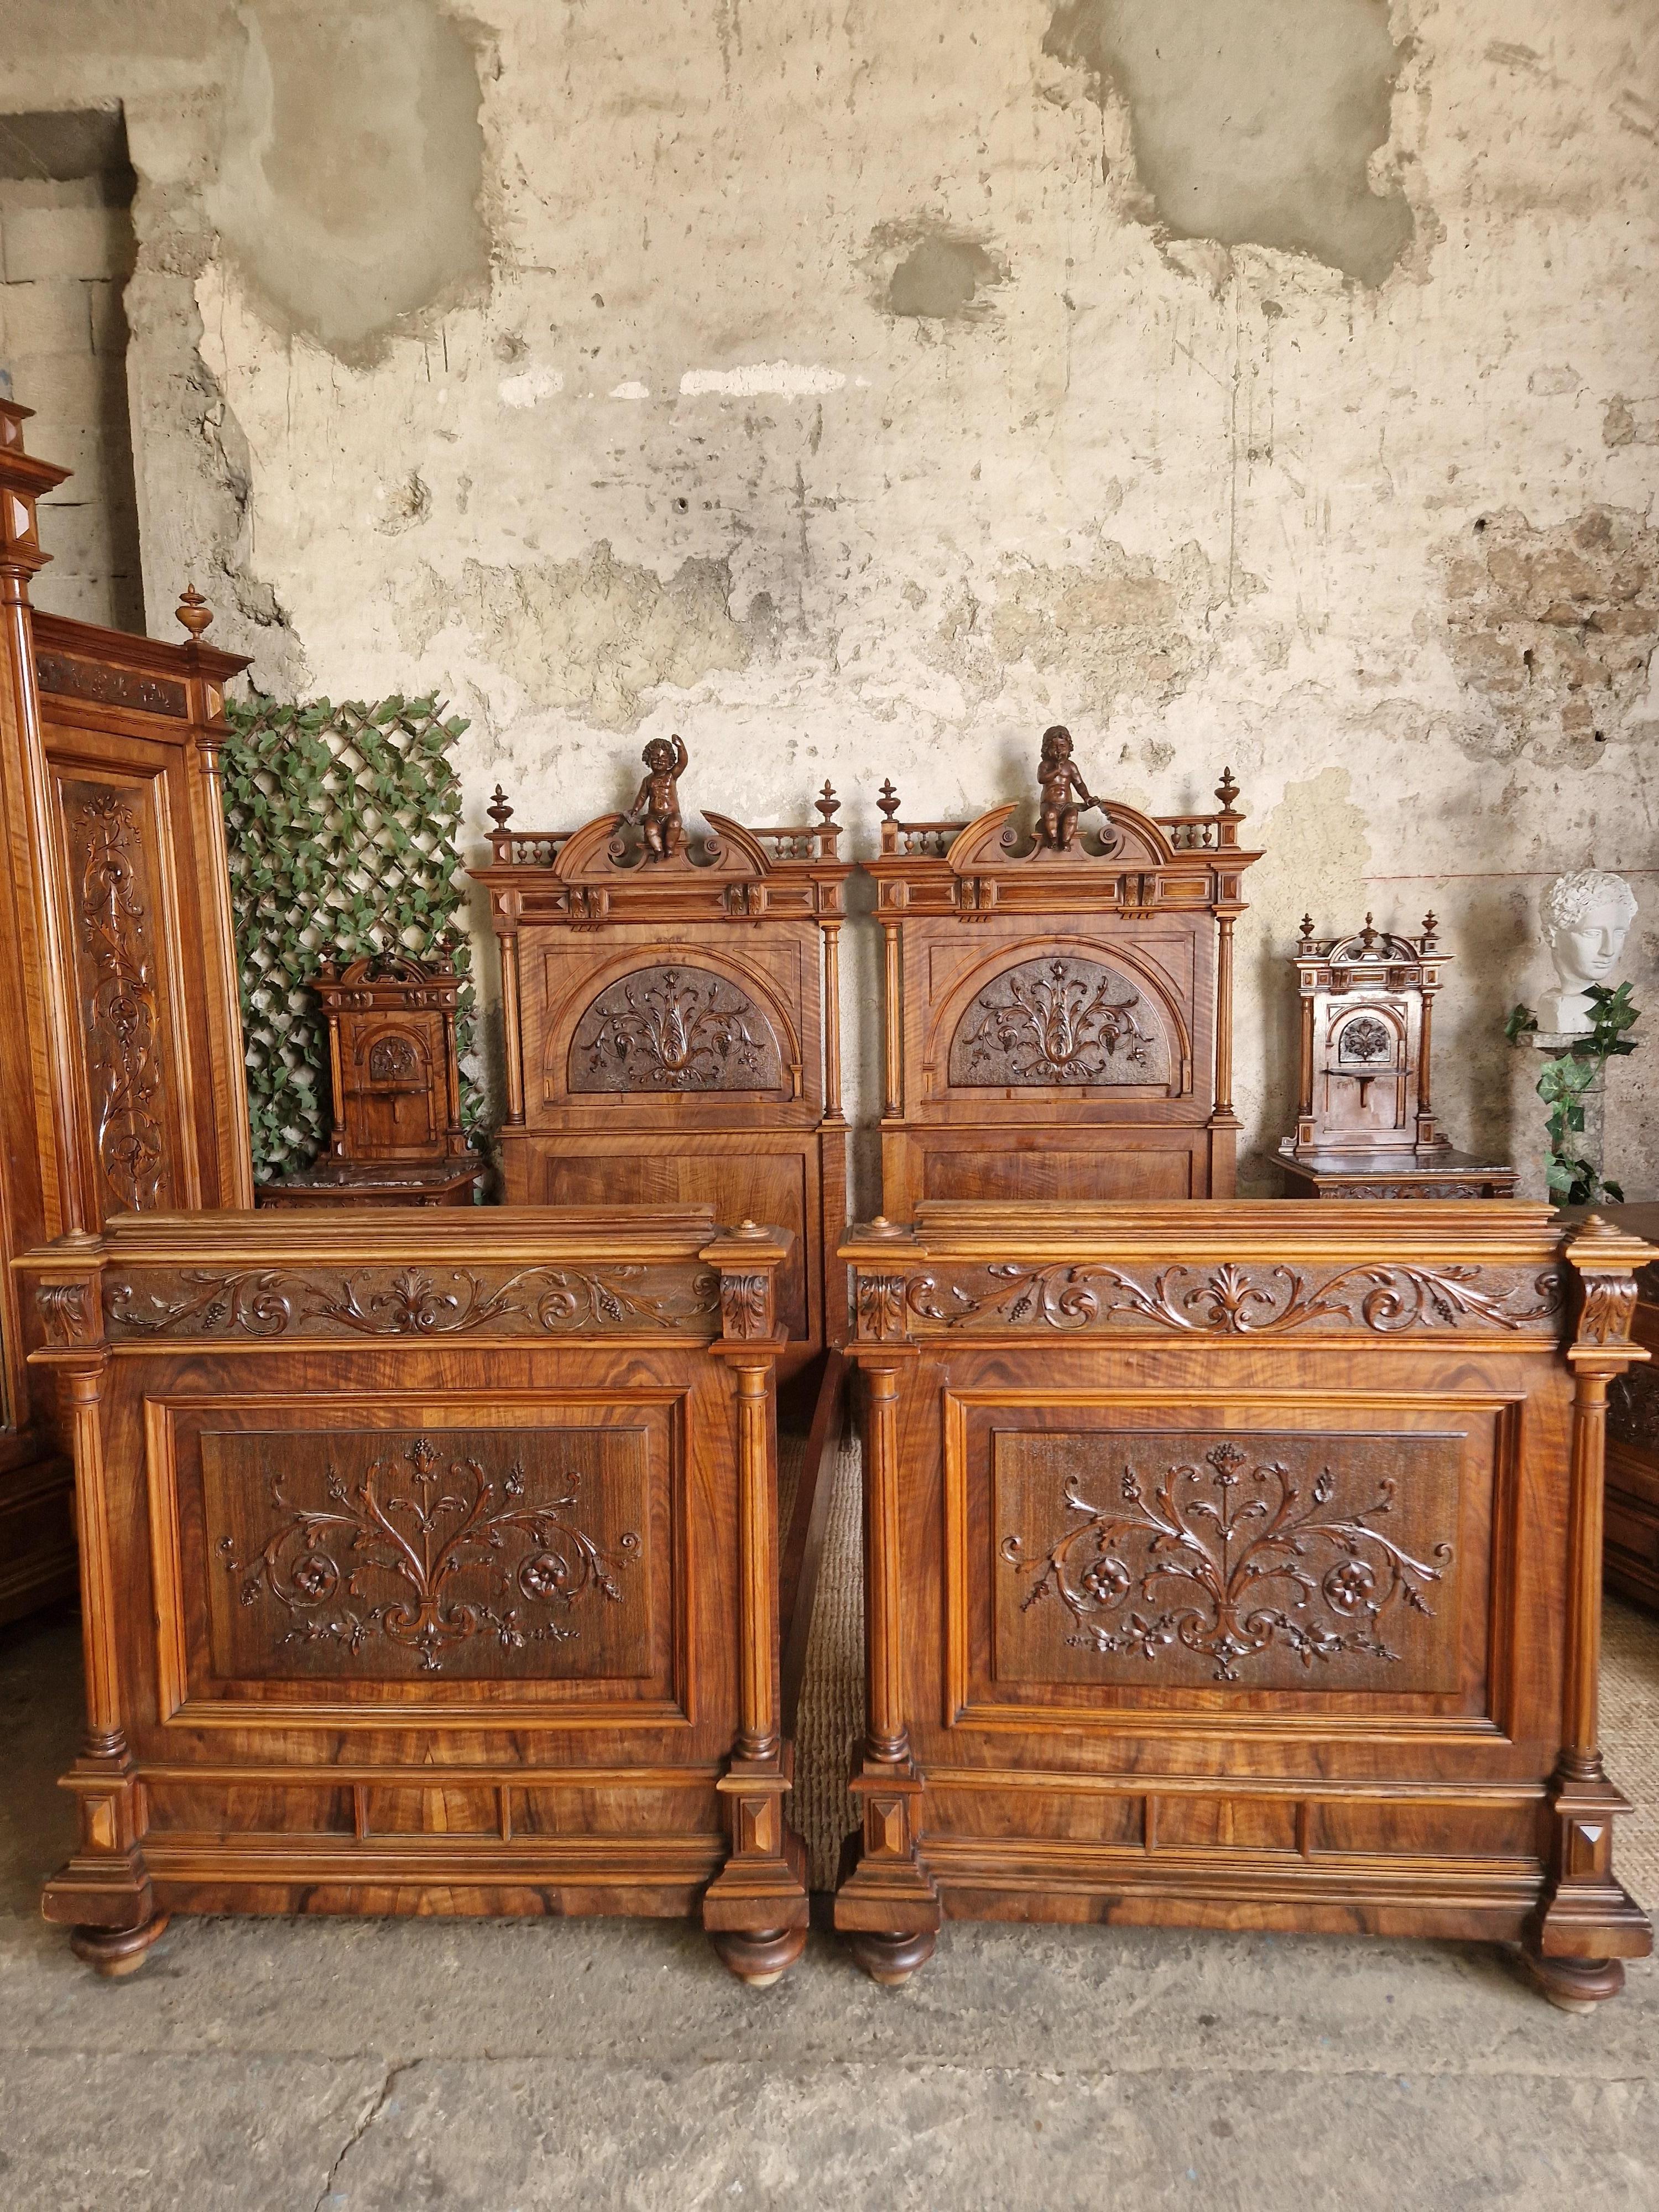 This exquisite 5-piece bedroom set features a magnificent Super king-size bed with an impressive Renaissance-style headboard and footboard, crafted from beautiful walnut wood. The bed has a fabulous carved putti cherubs to the Headboards. The set